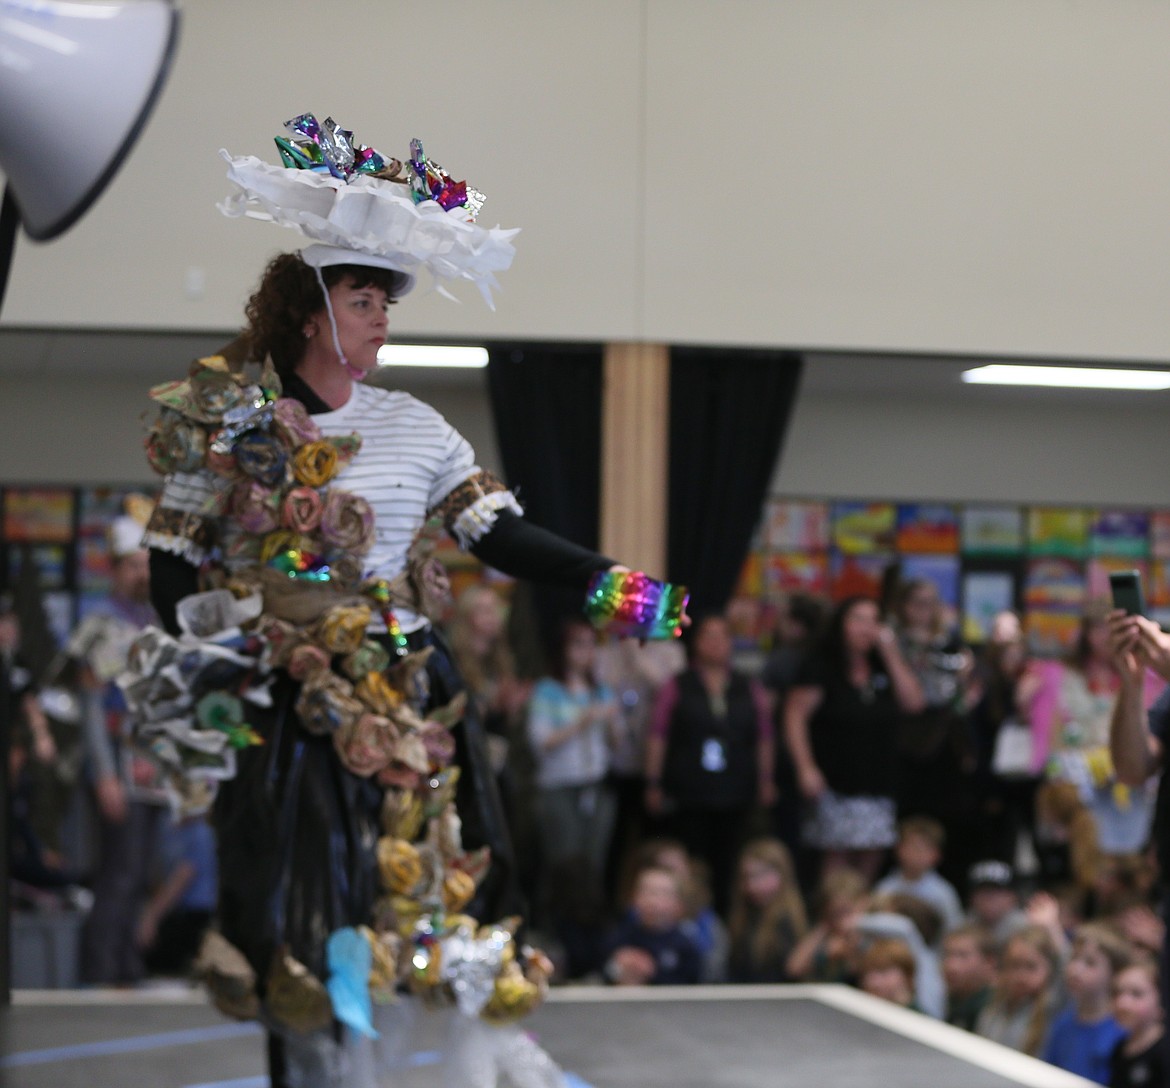 Second-grade teacher Robin Curtis struts in a colorfully upcycled dress and hat Monday during the Trashin' Fashion Show at Hayden Canyon Charter.